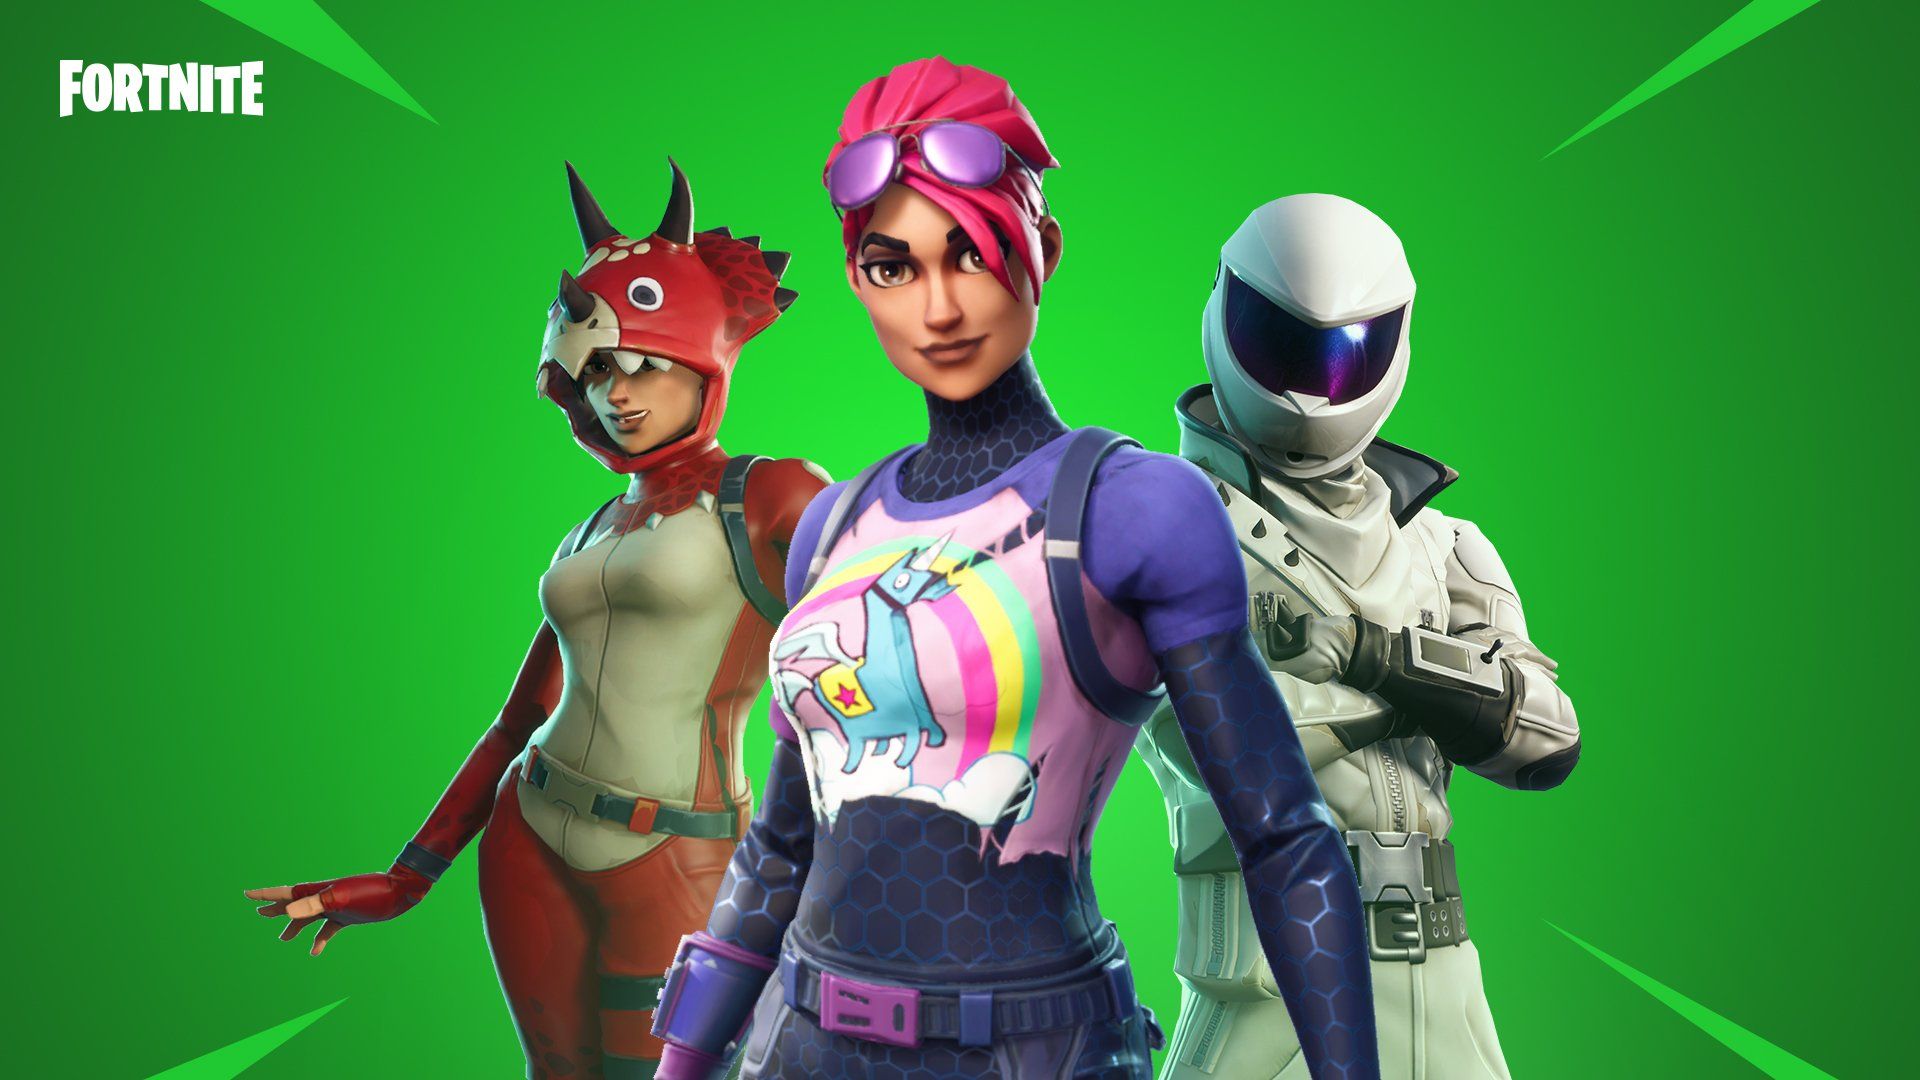 Fortnite are very excited to announce our new